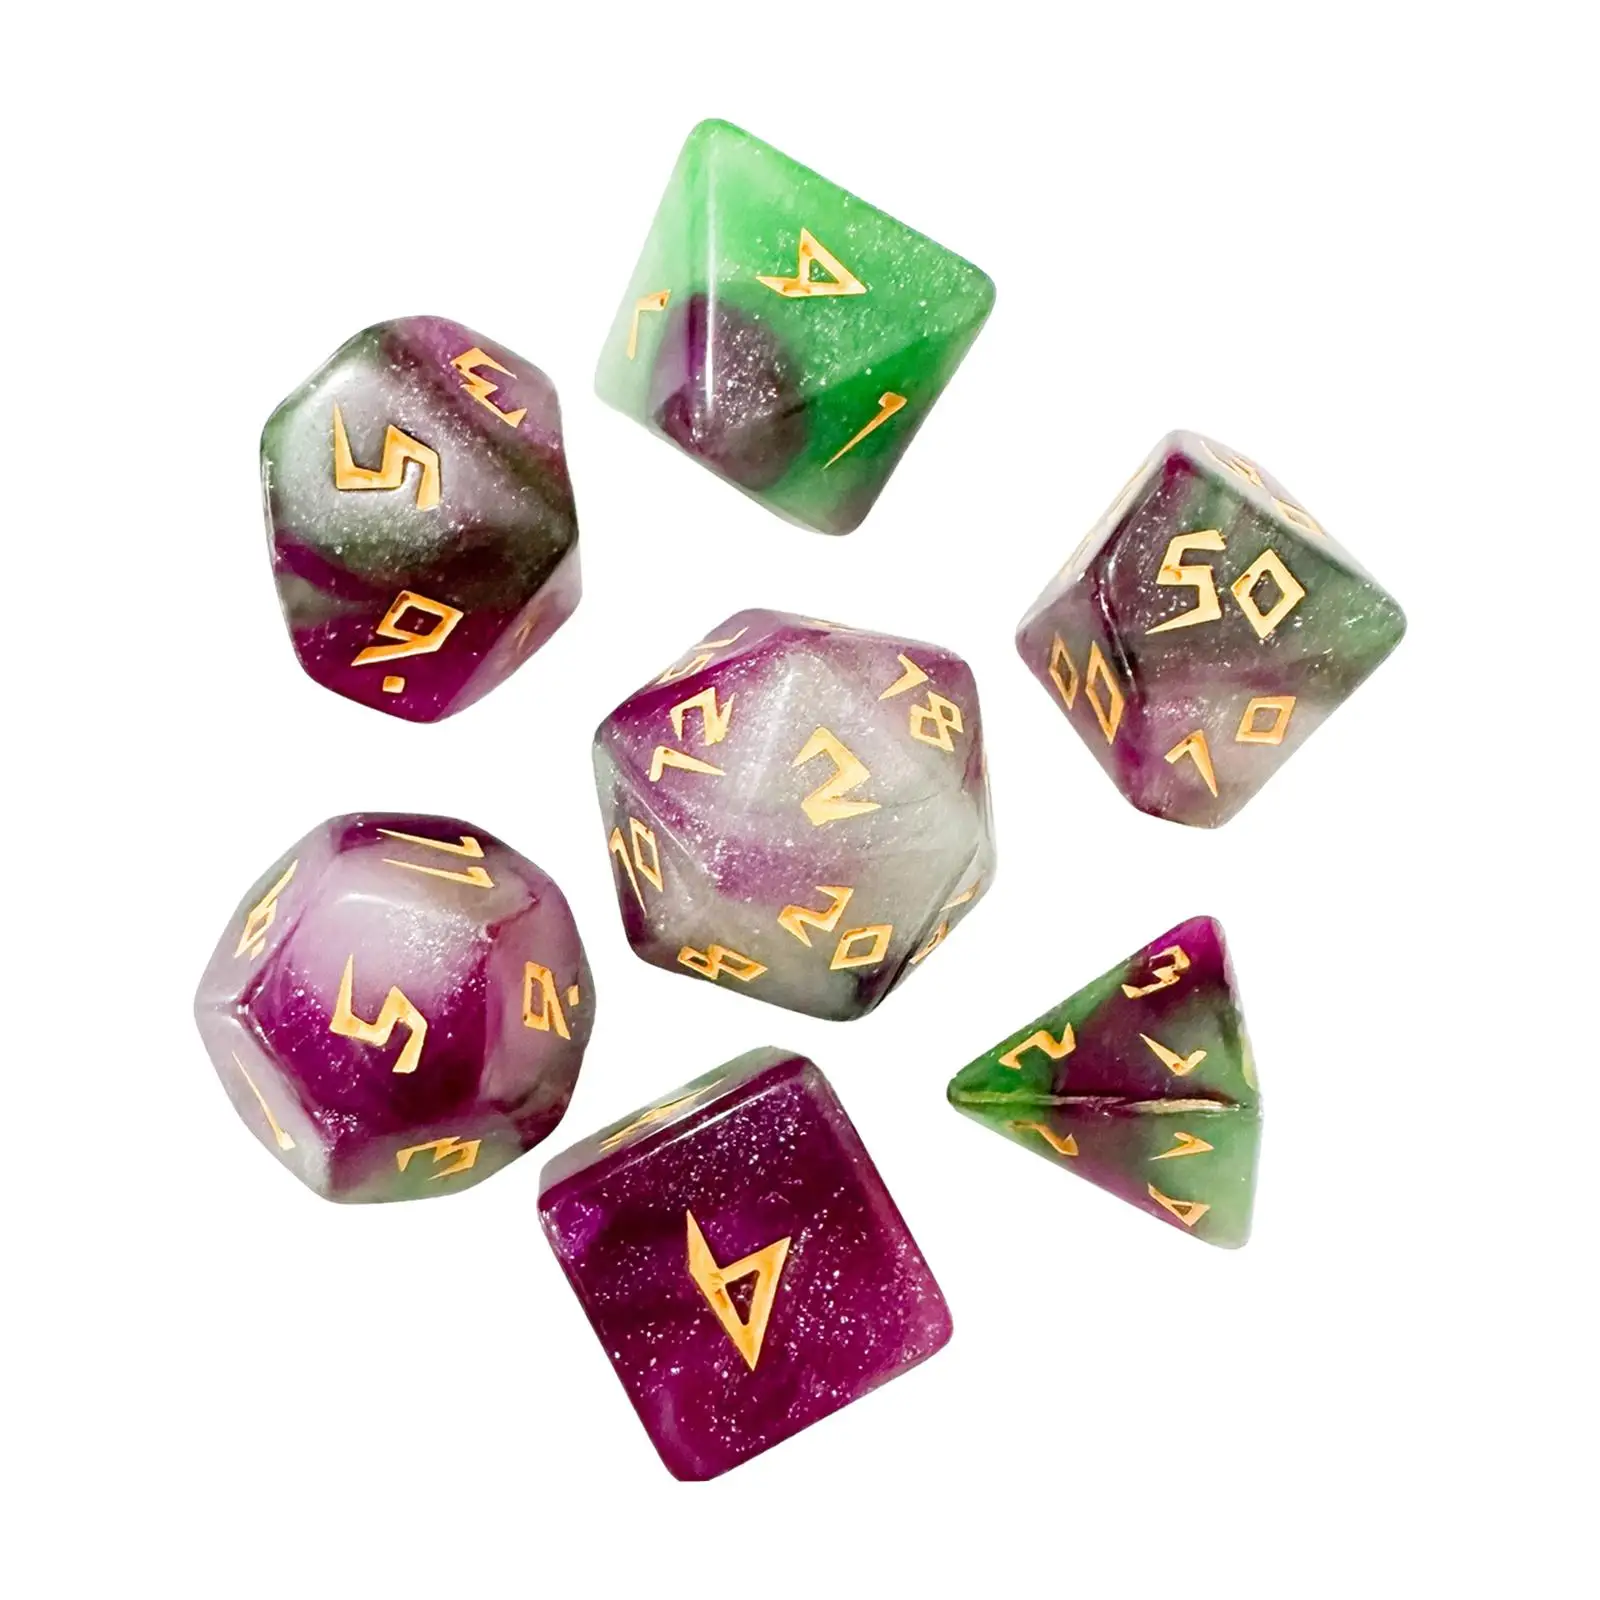 7Pcs Polyhedral Dice Handmade Multisided Dice for Role Playing Tabletop Games Party Favors Entertainment Toy Family Gatherings